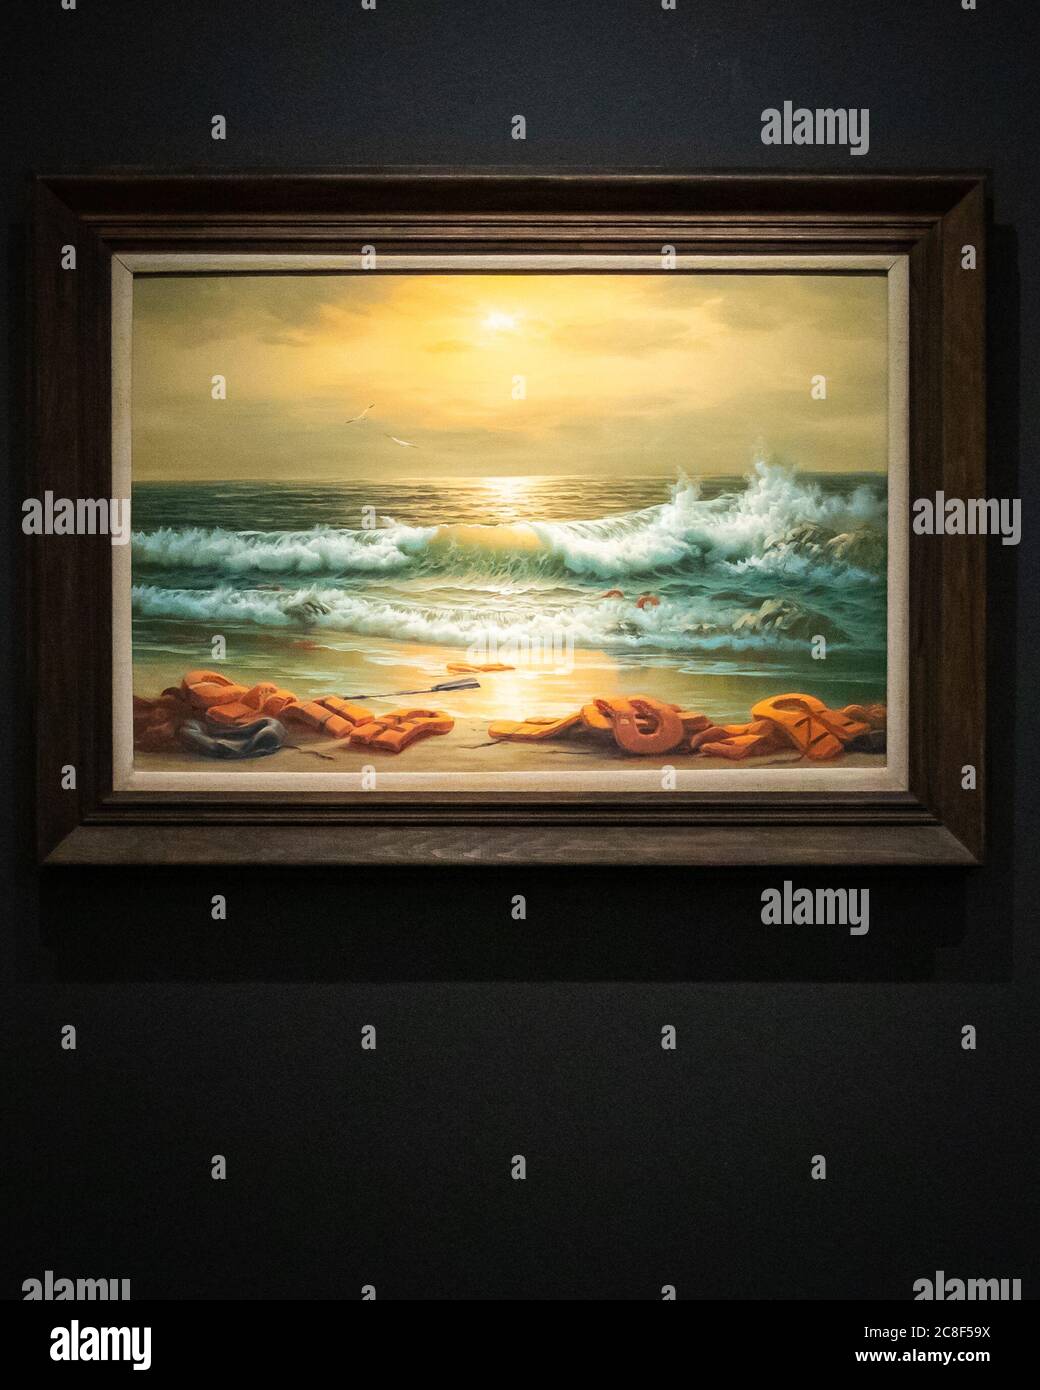 One of a triptych, Mediterranean Sea View by Banksy 2017, reworked oil paintings in artists frames in three parts with an estimate of GBP 800k -1.2 million during a press preview at Sotheby's in London ahead of their 'From Rembrandt to Richter' sale on July 28. Stock Photo